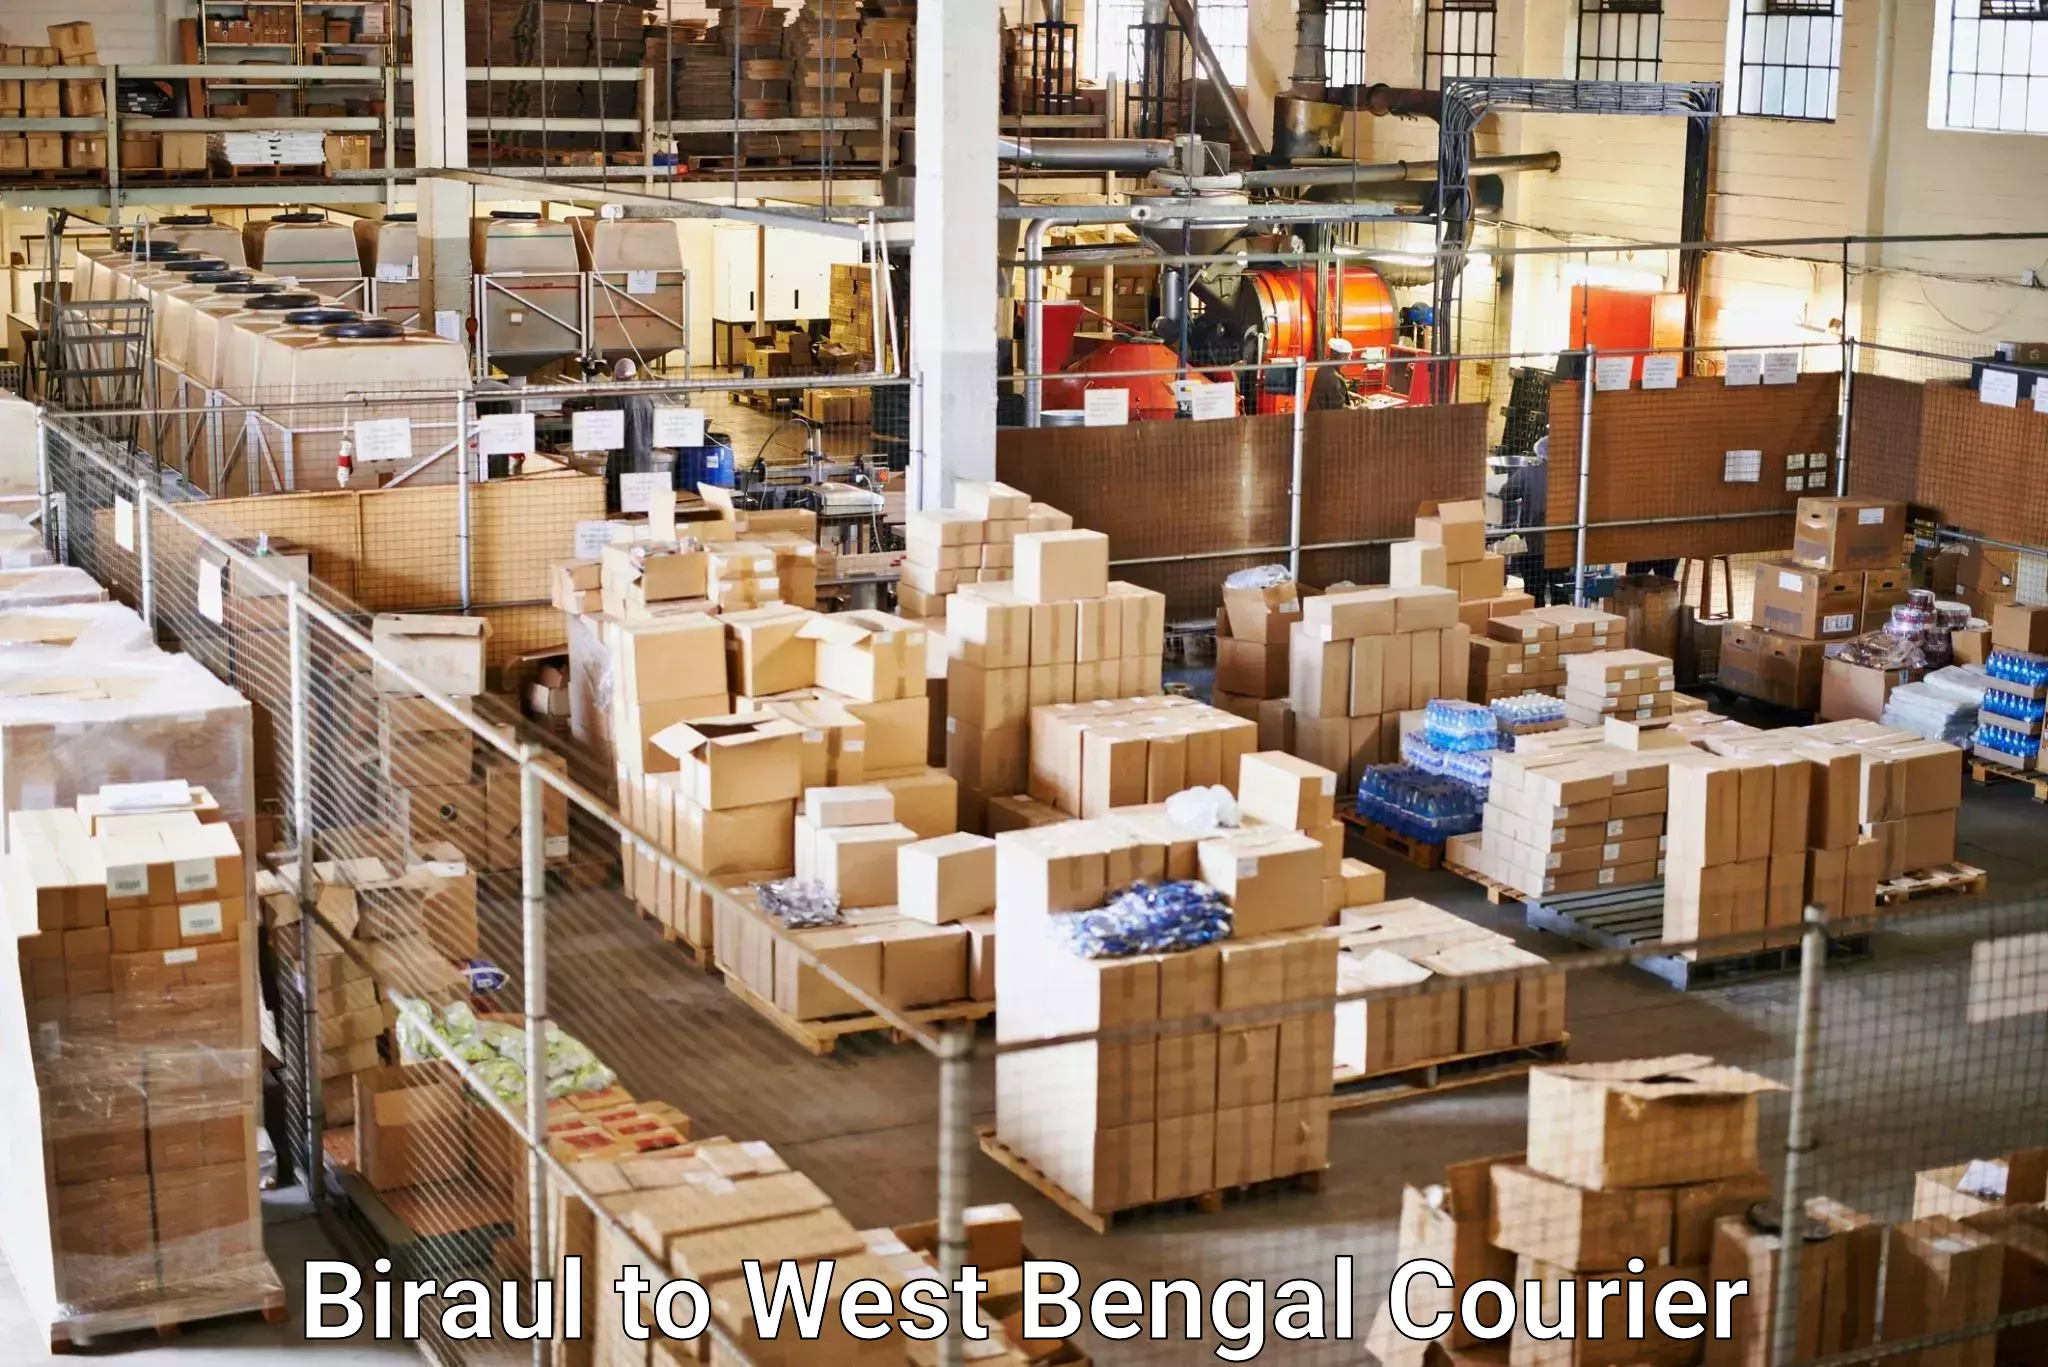 Courier service comparison Biraul to West Bengal